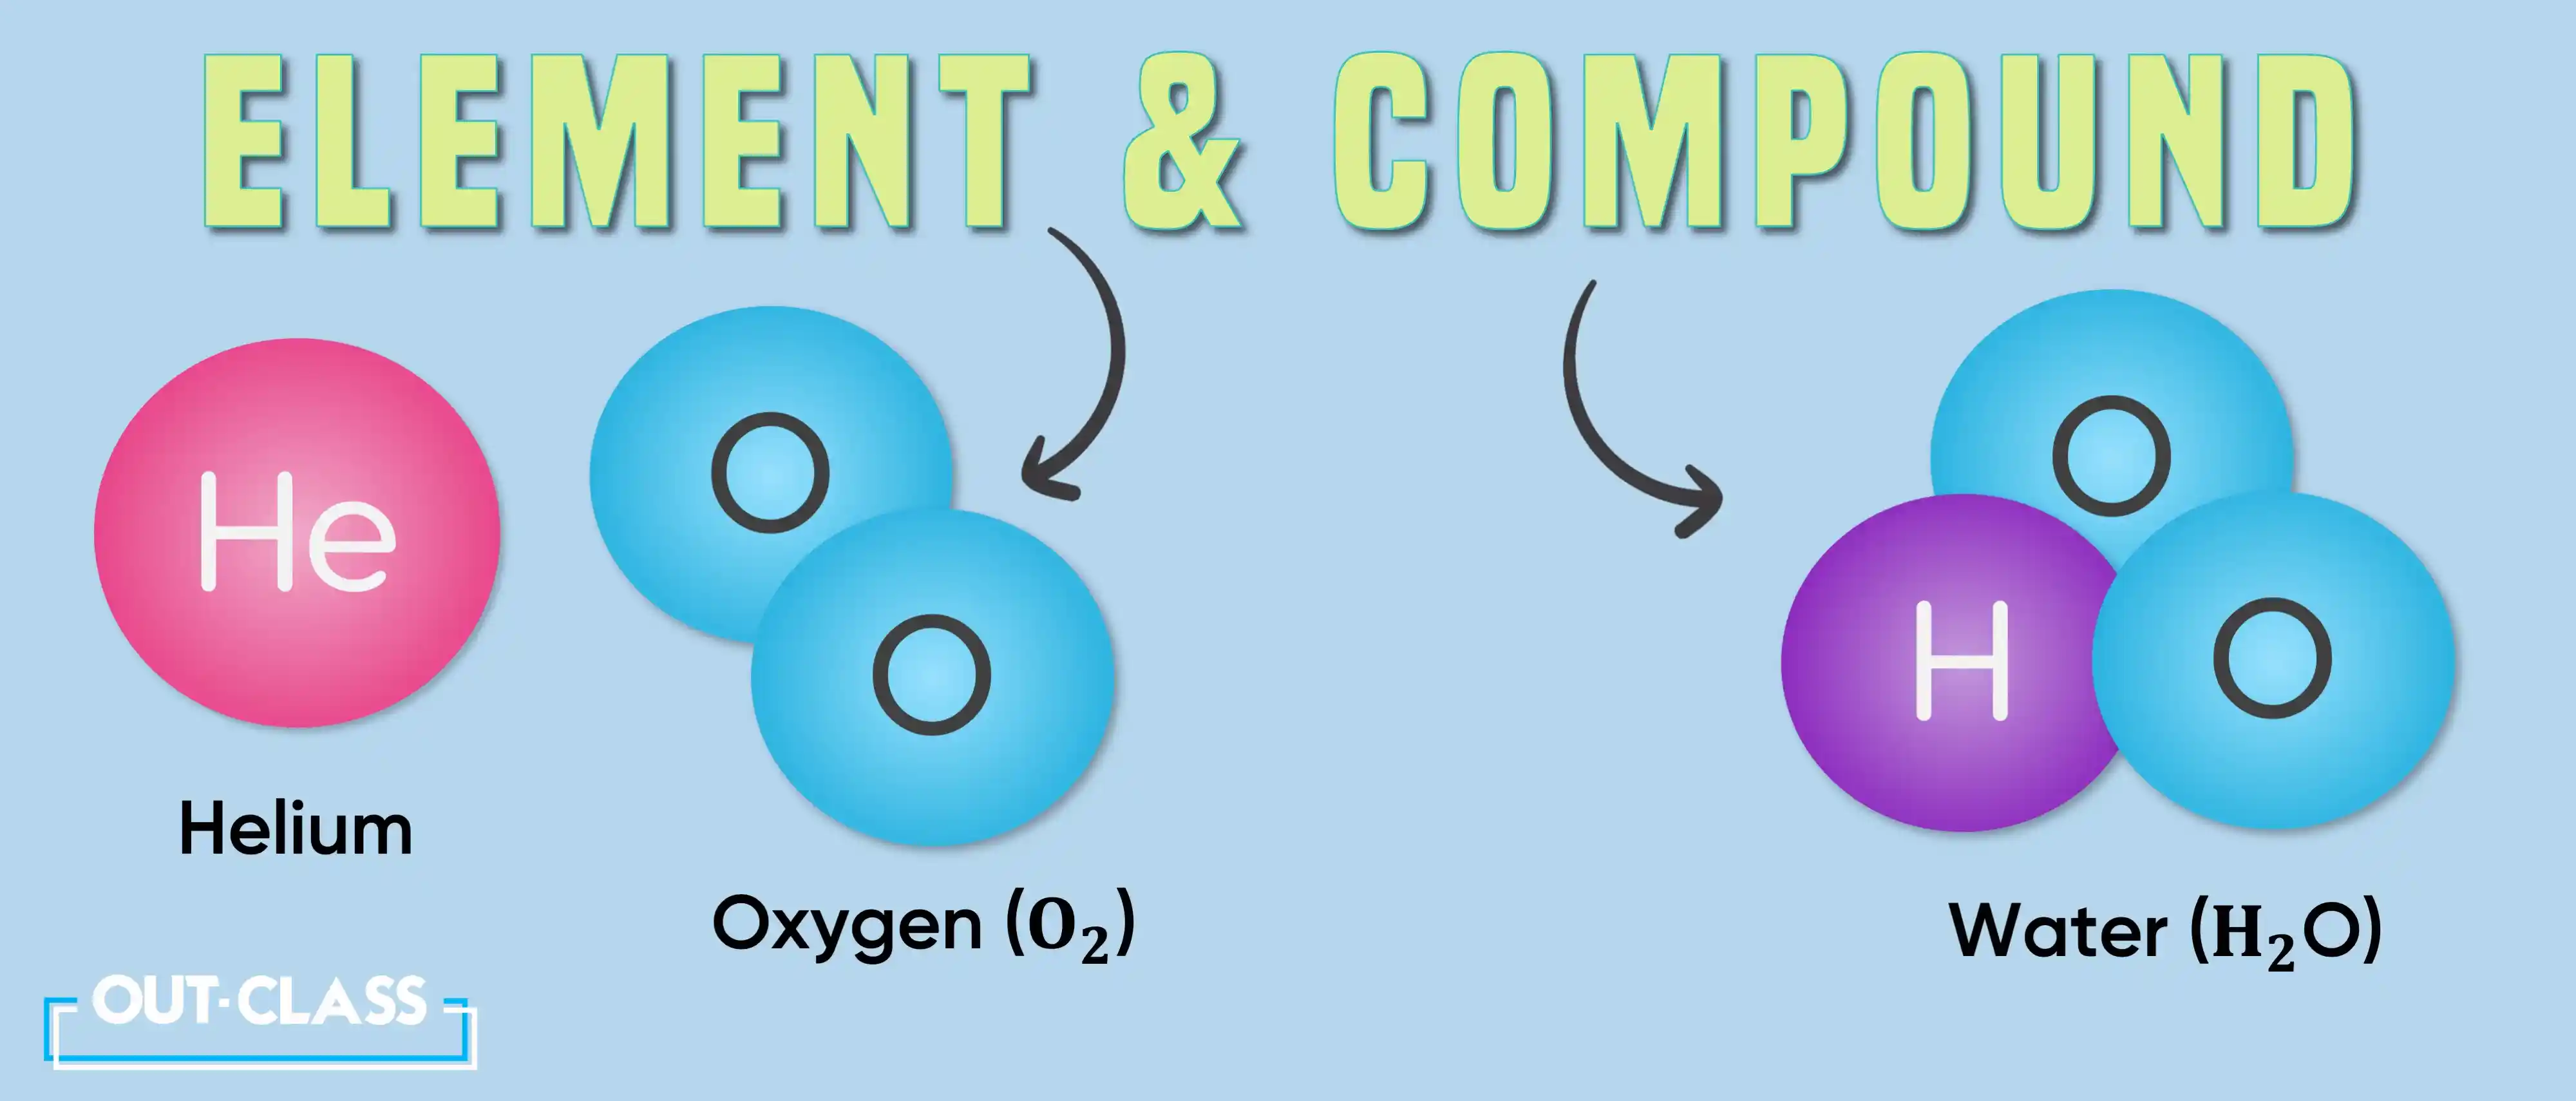 The image shows the difference between element and compound as well as 10 examples of elements and compounds.